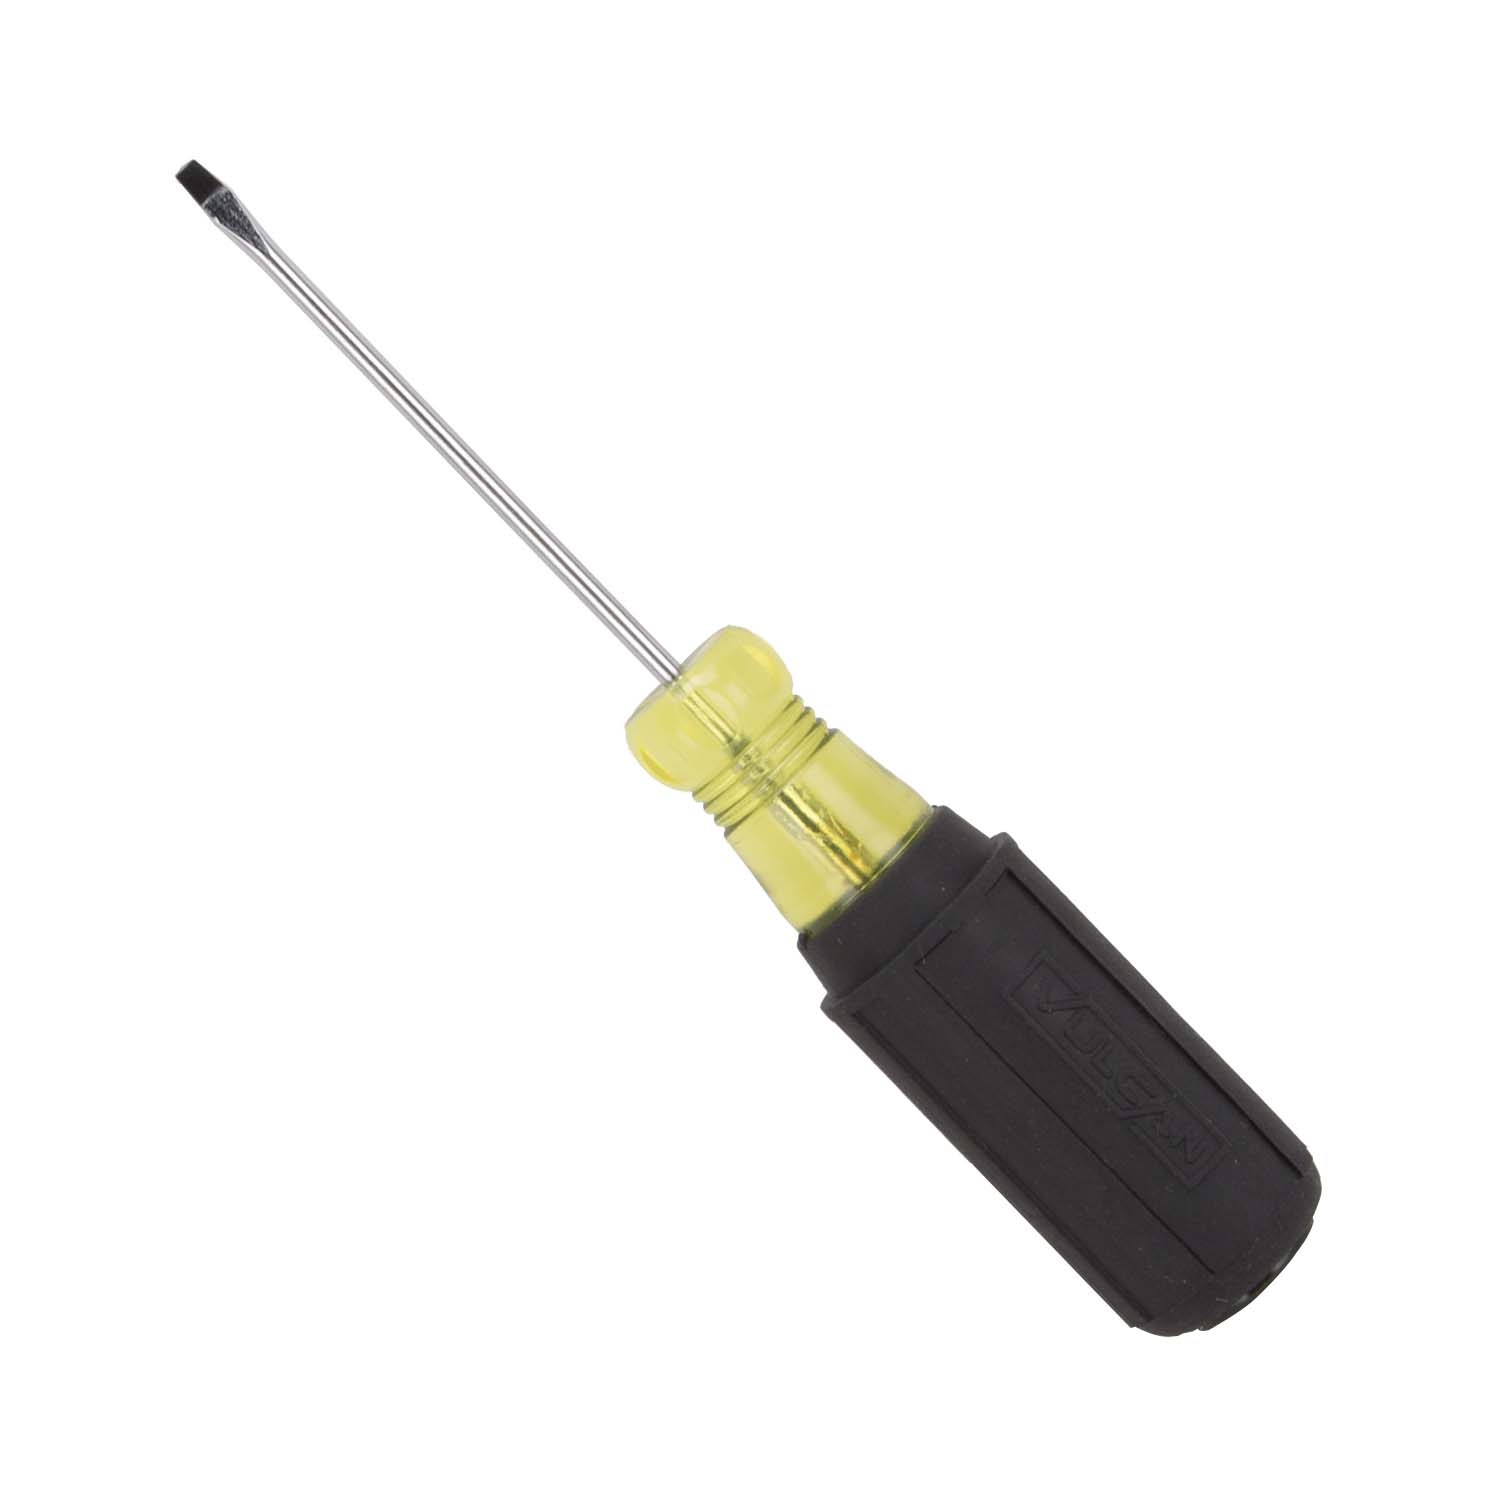 Screwdriver, 1/8 in Drive, Slotted Drive, 6-1/2 in OAL, 3 in L Shank, Plastic/Rubber Handle